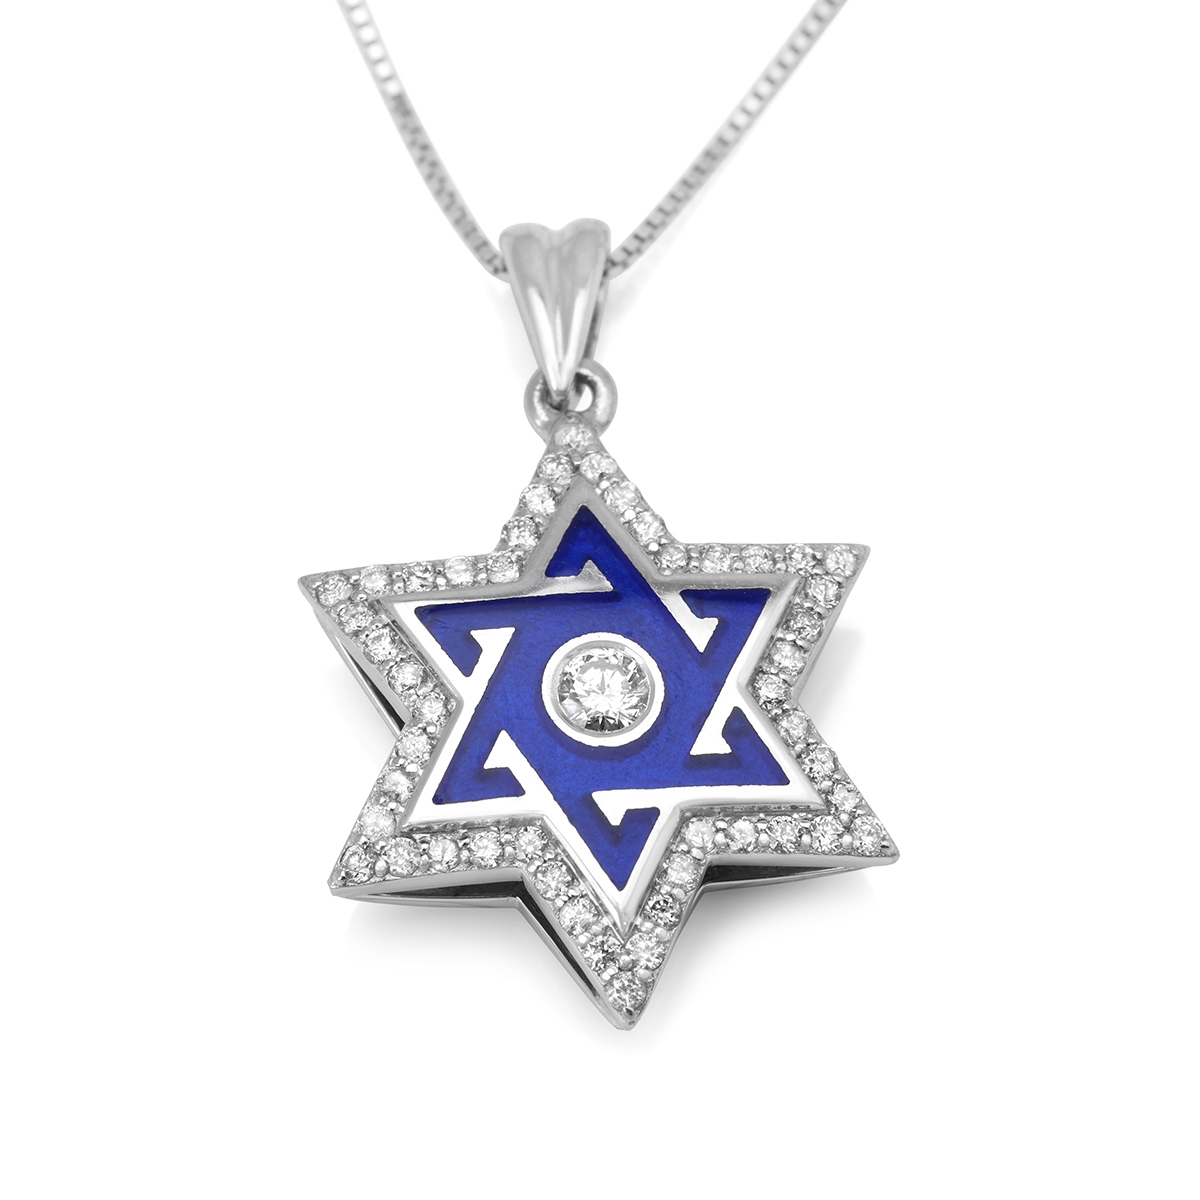 Diamond-Accented Star of David 14K White Gold Pendant Necklace With Blue Enamel - 1